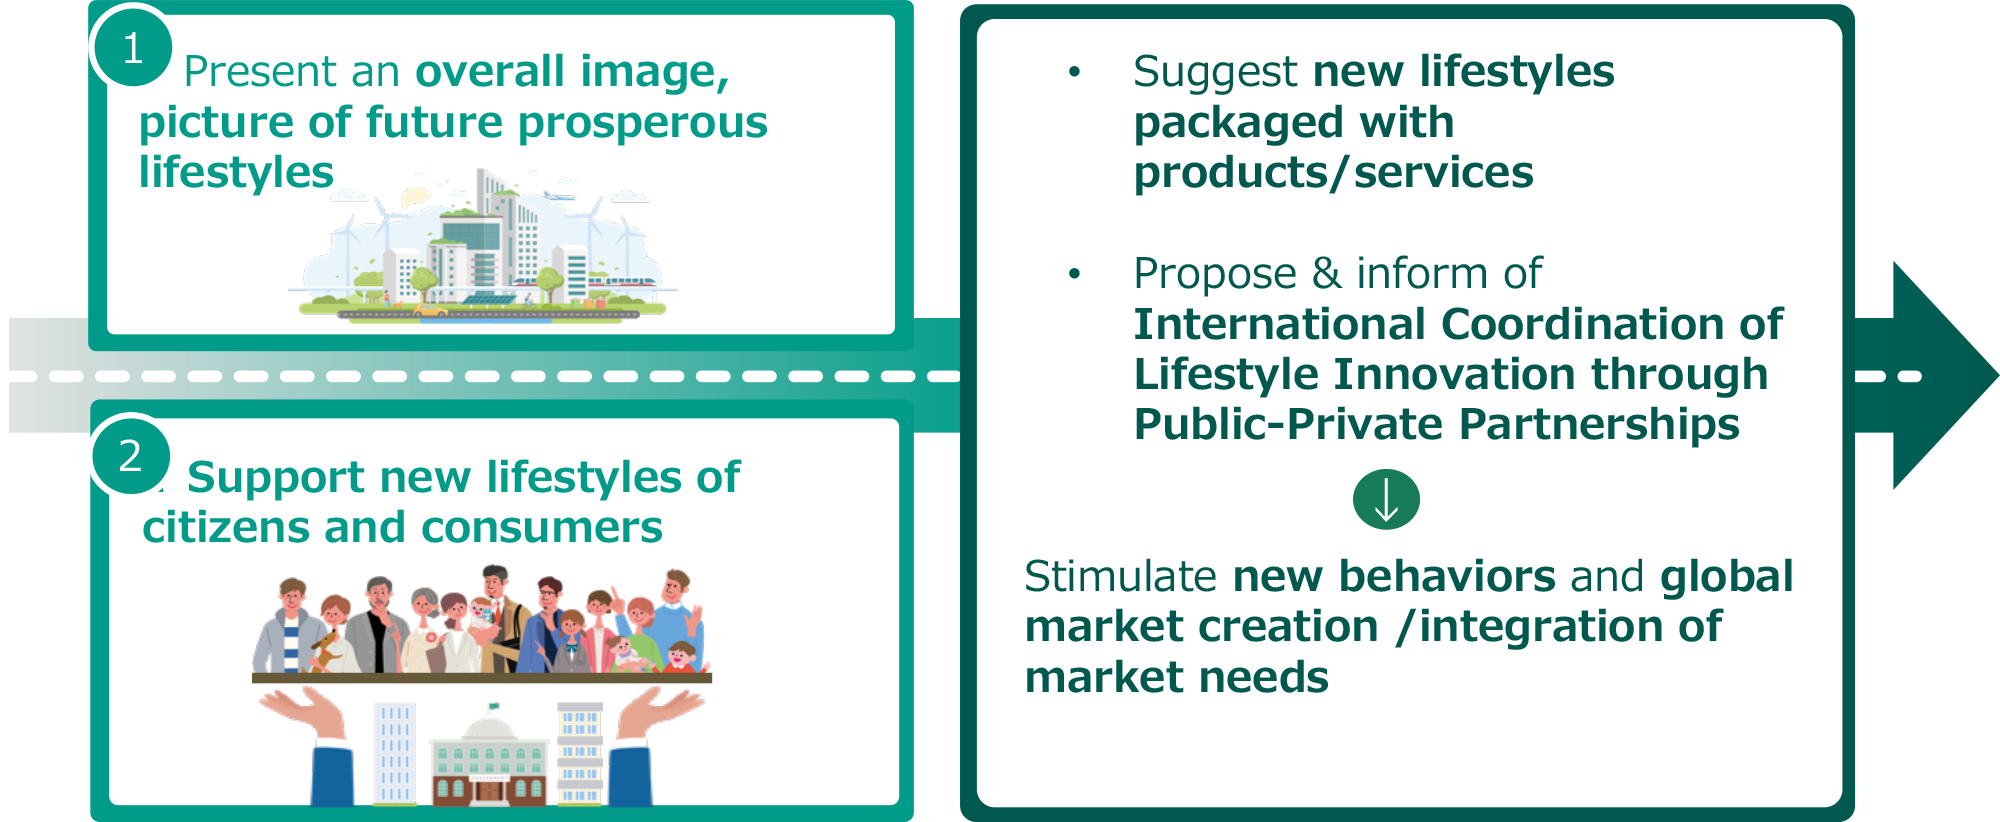 1.Present an overall image, picture of future prosperous lifestyles. 2.Support new lifestyles of citizens and consumers. Suggest new lifestyles packaged with products/services. Propose & inform of International Coordination of Lifestyle Innovation through Public-Private Partnerships.Stimulate new behaviors and global market creation /integration of market needs.